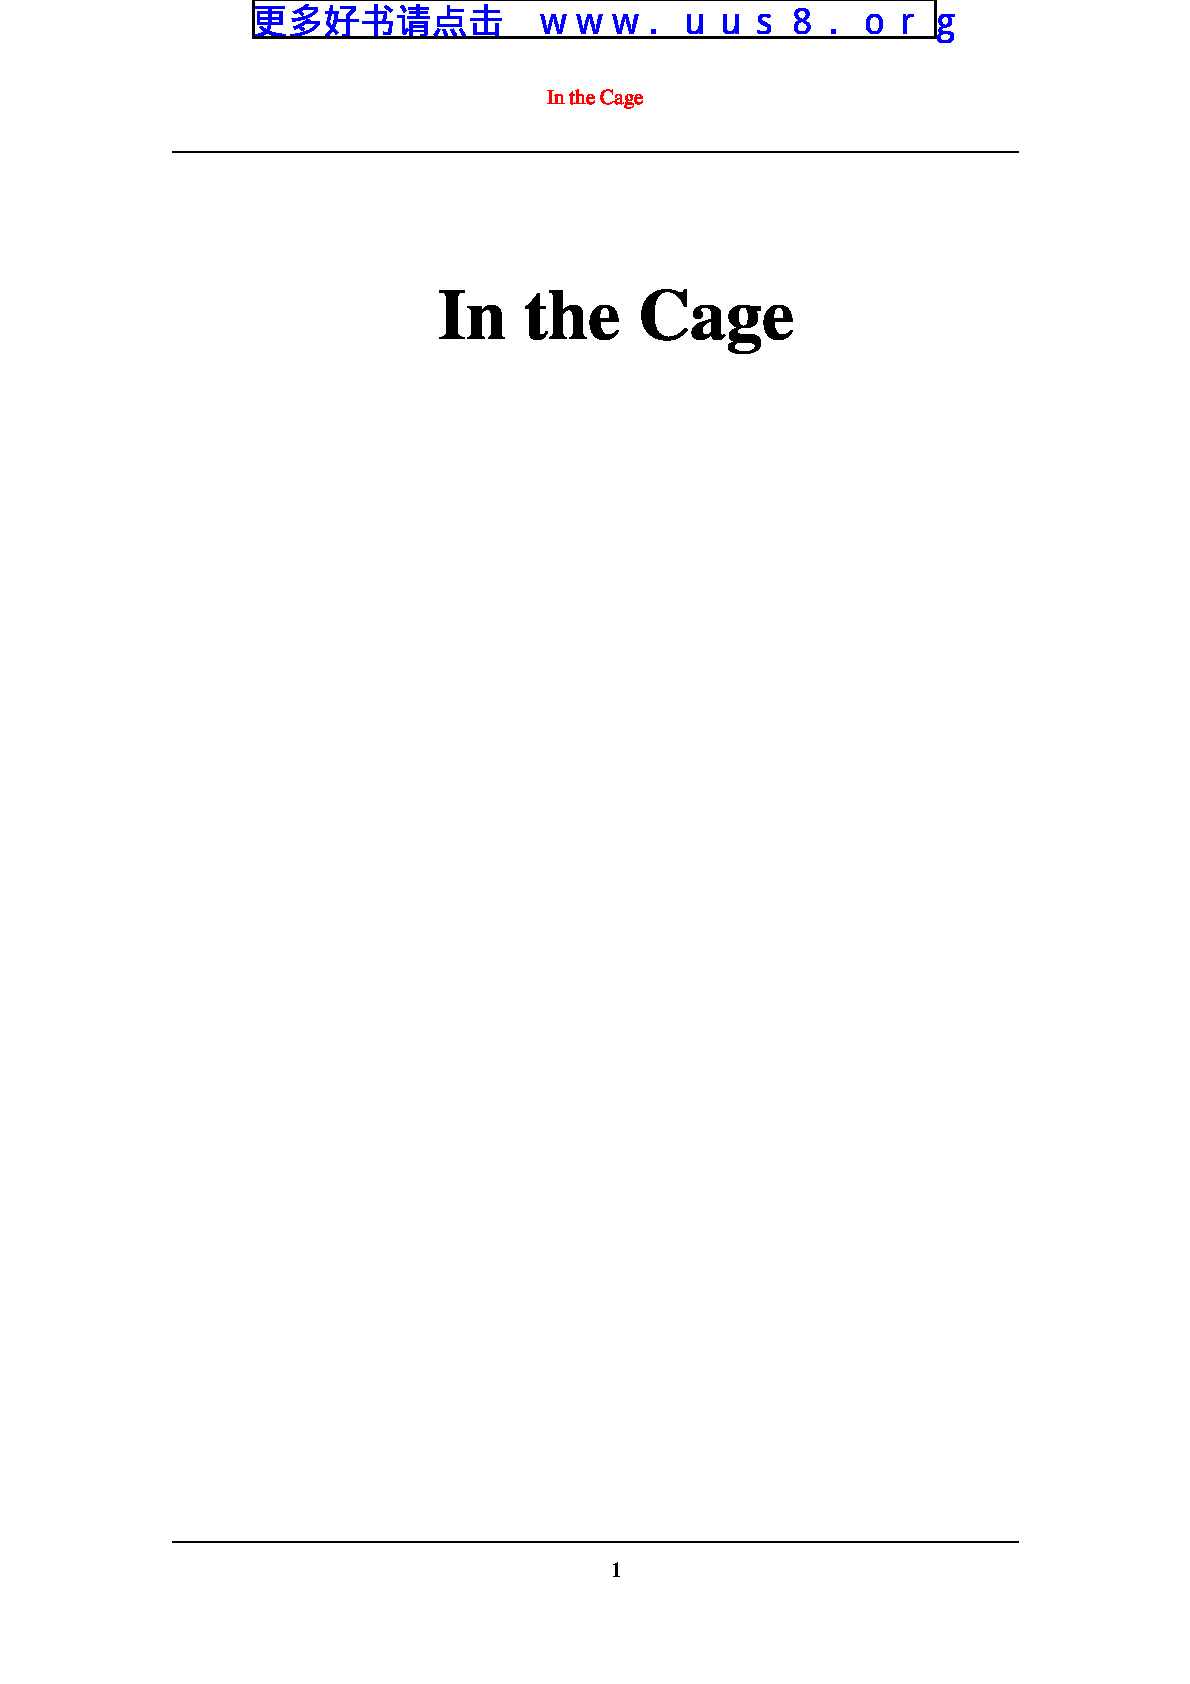 In_the_Cage(在笼中)